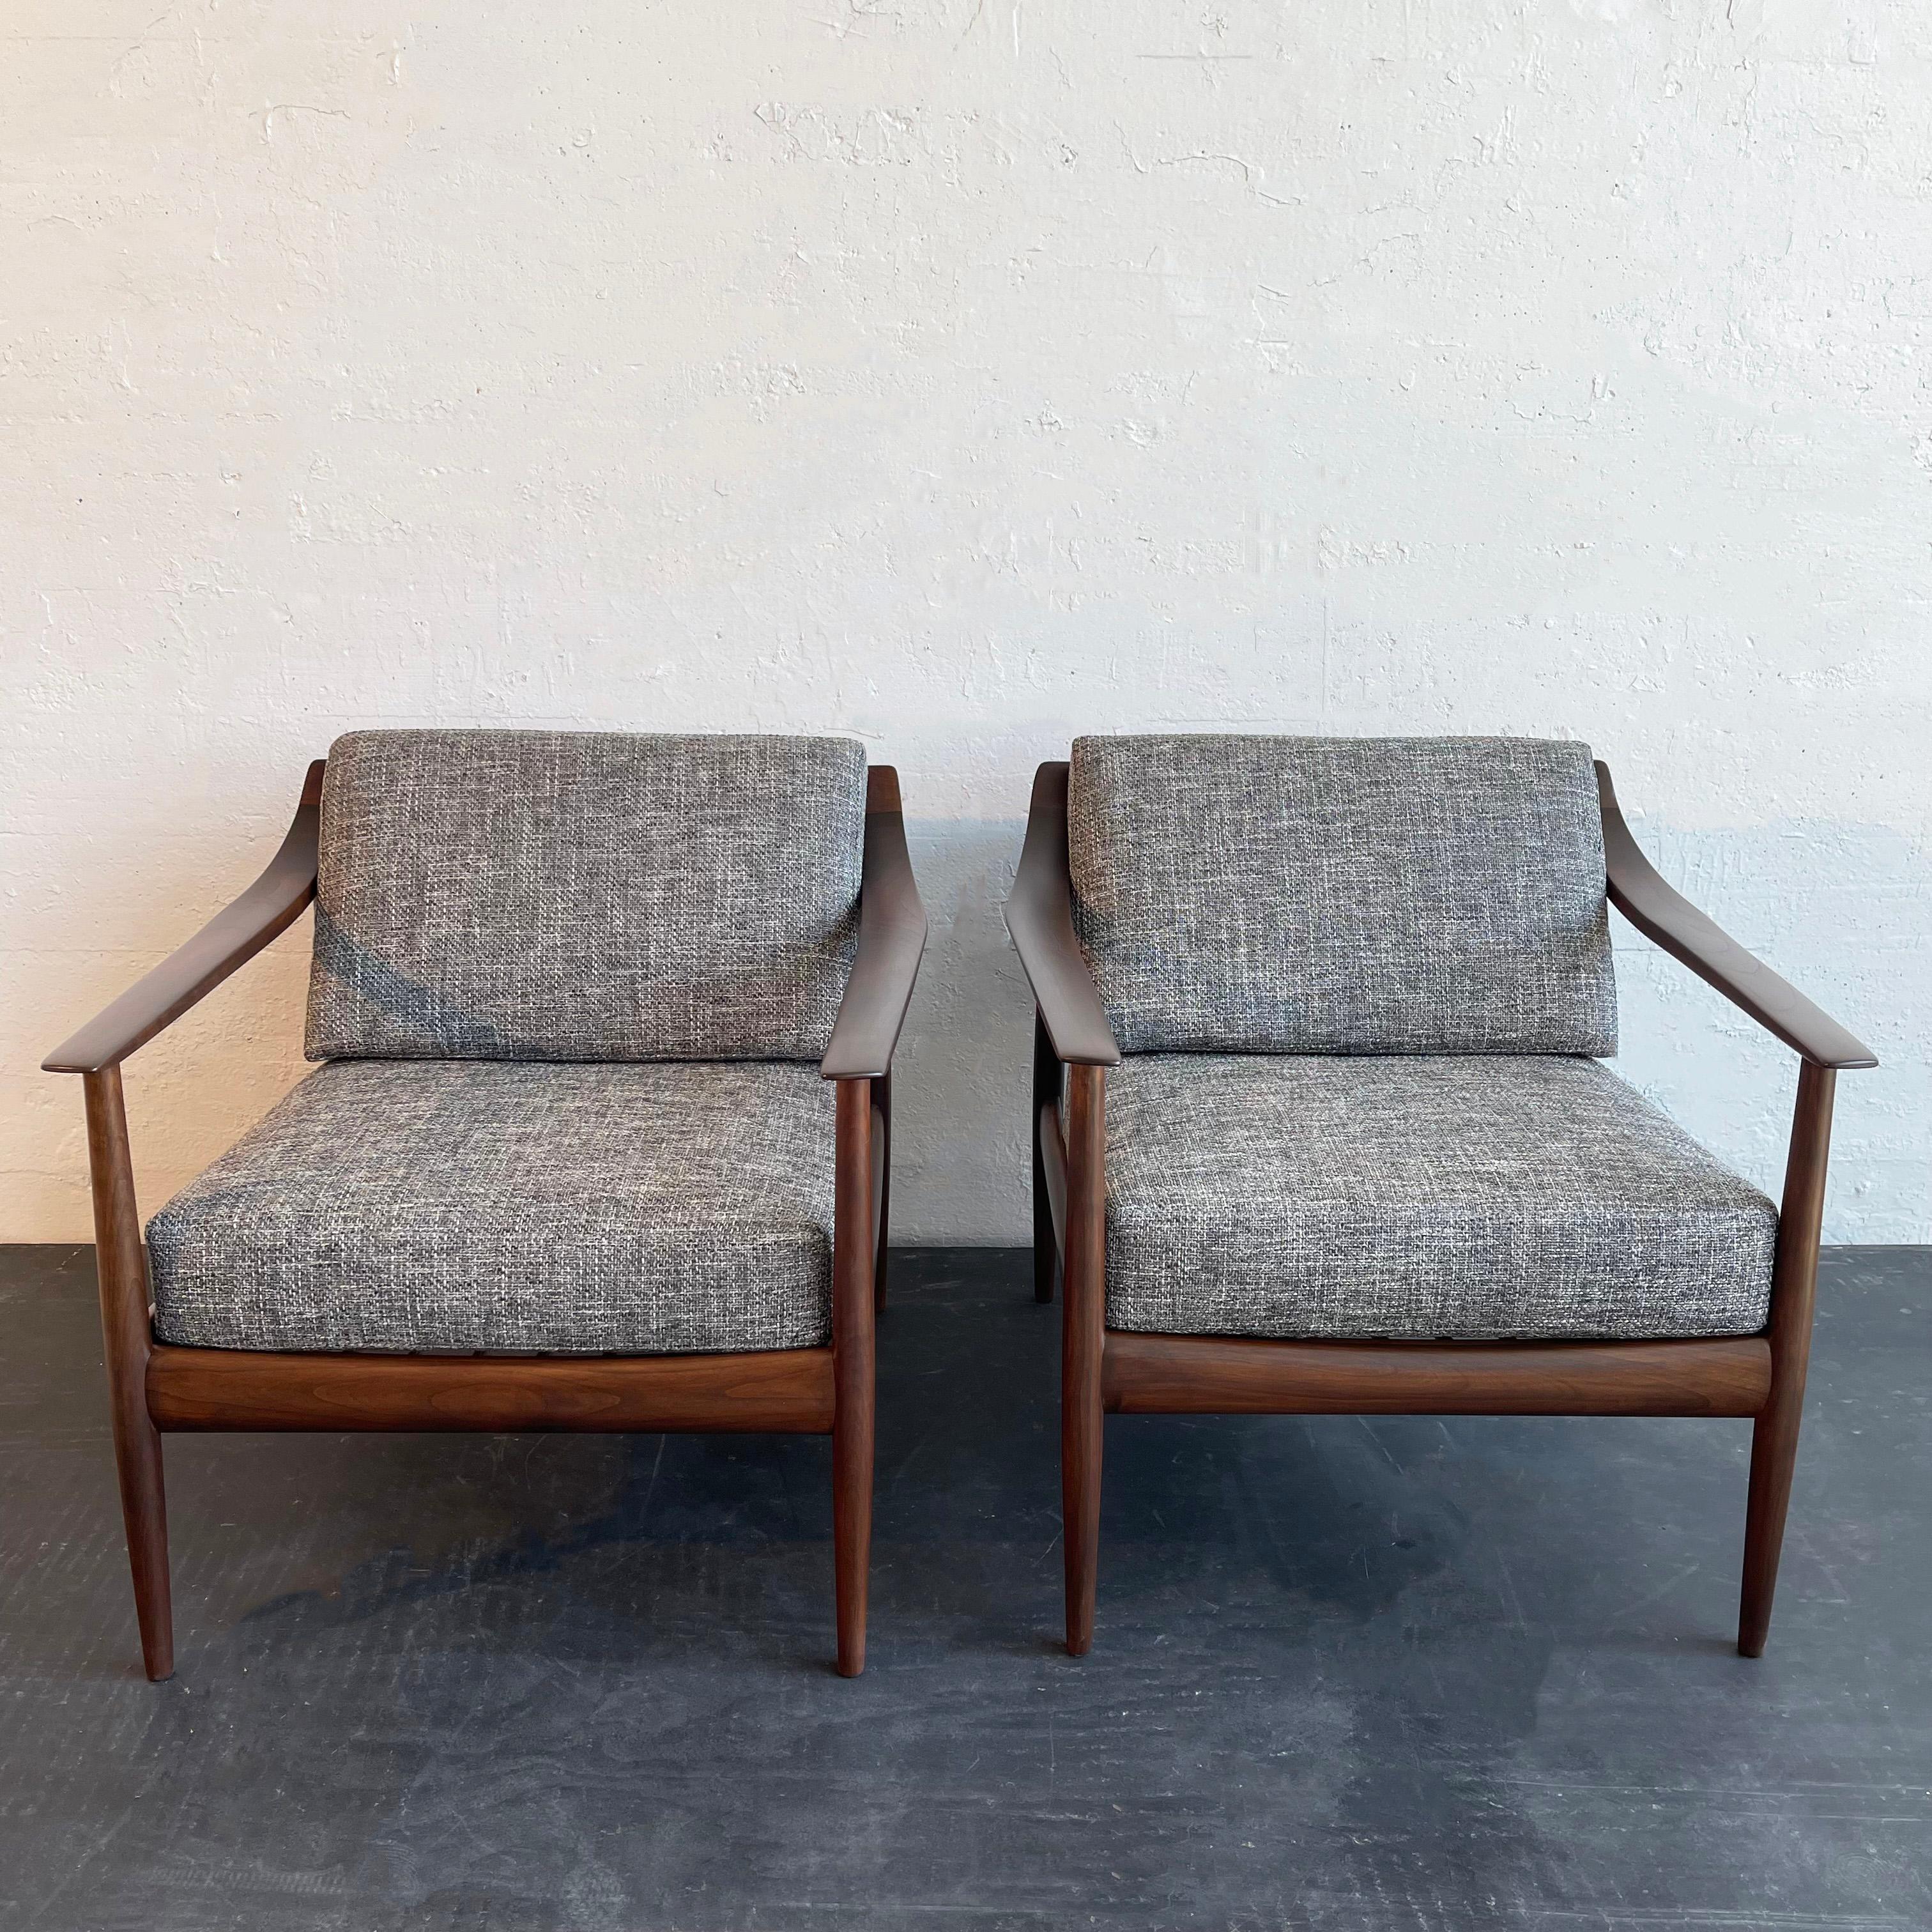 20th Century Mid-Century Modern Walnut Lounge Chairs By Knoll Antimott For Sale